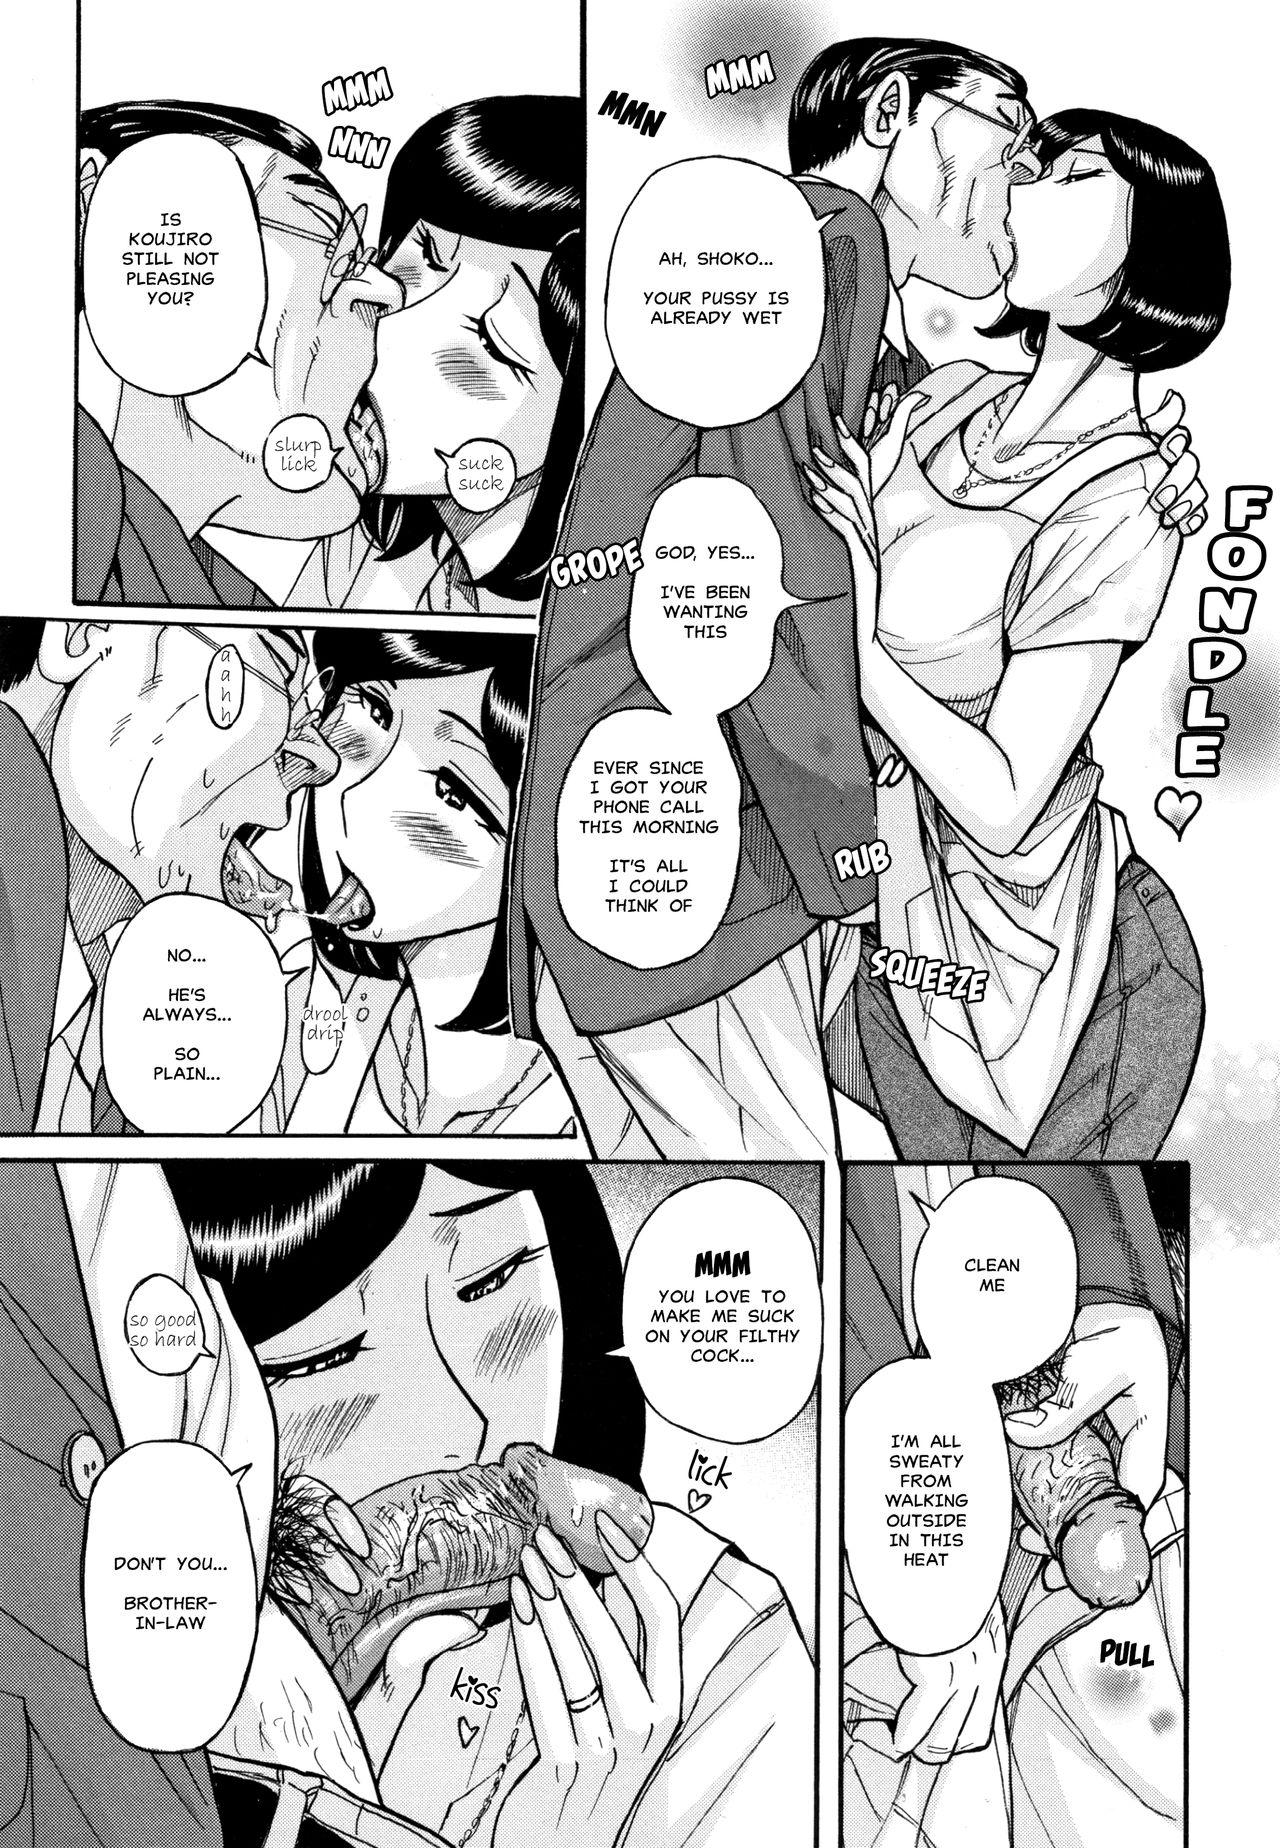 Hidden PLEASE EXPUNGE Ejaculation - Page 10